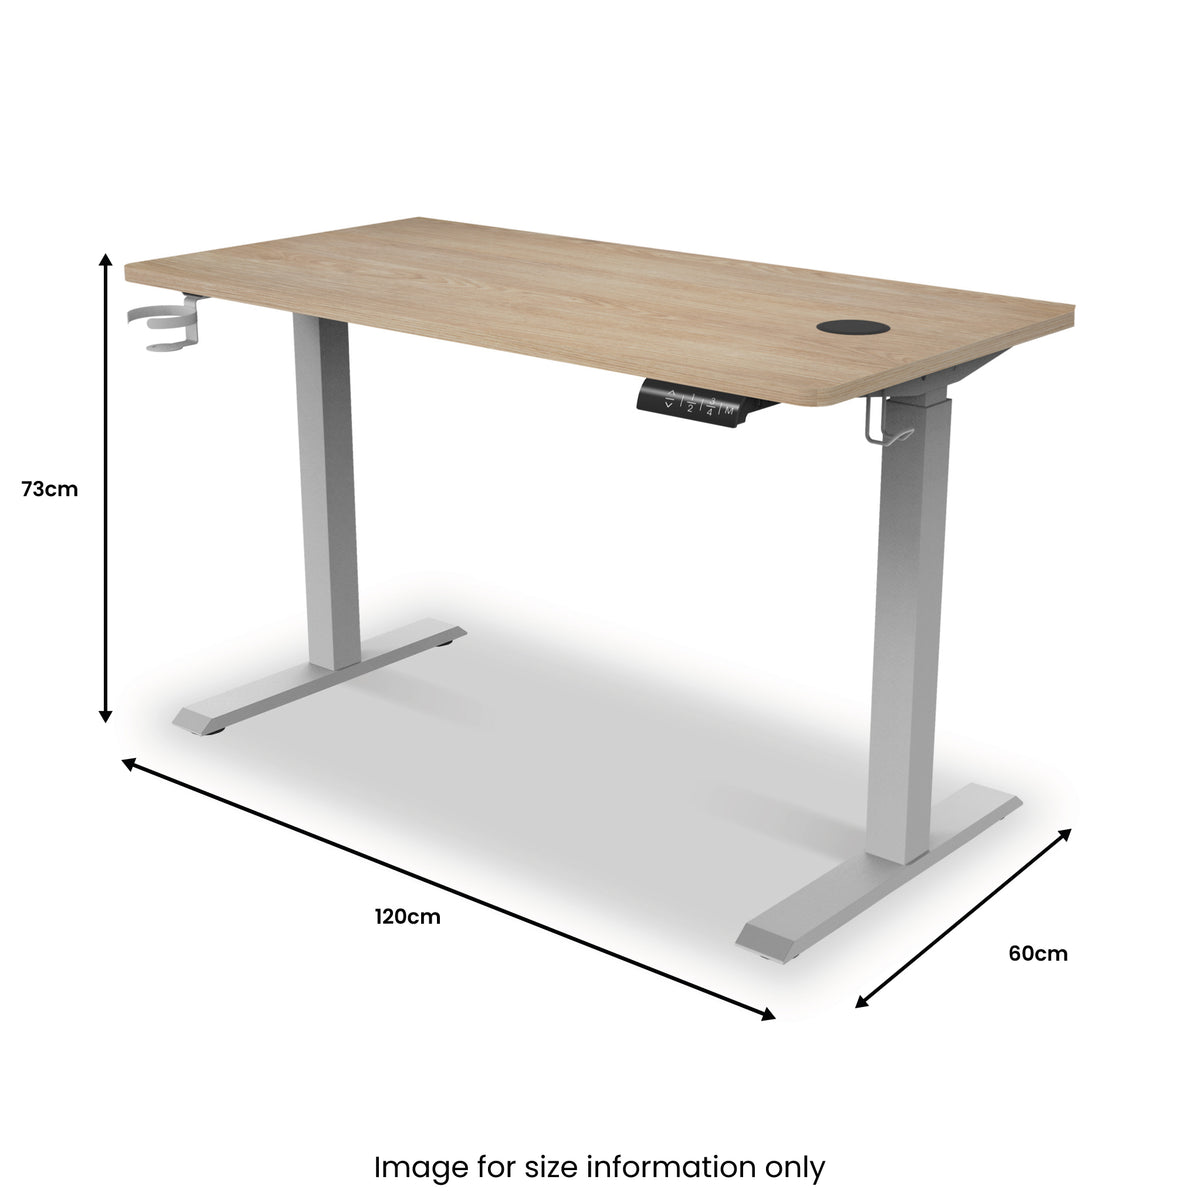 Koble Gino Smart Electric Height Adjustable Desk dimension